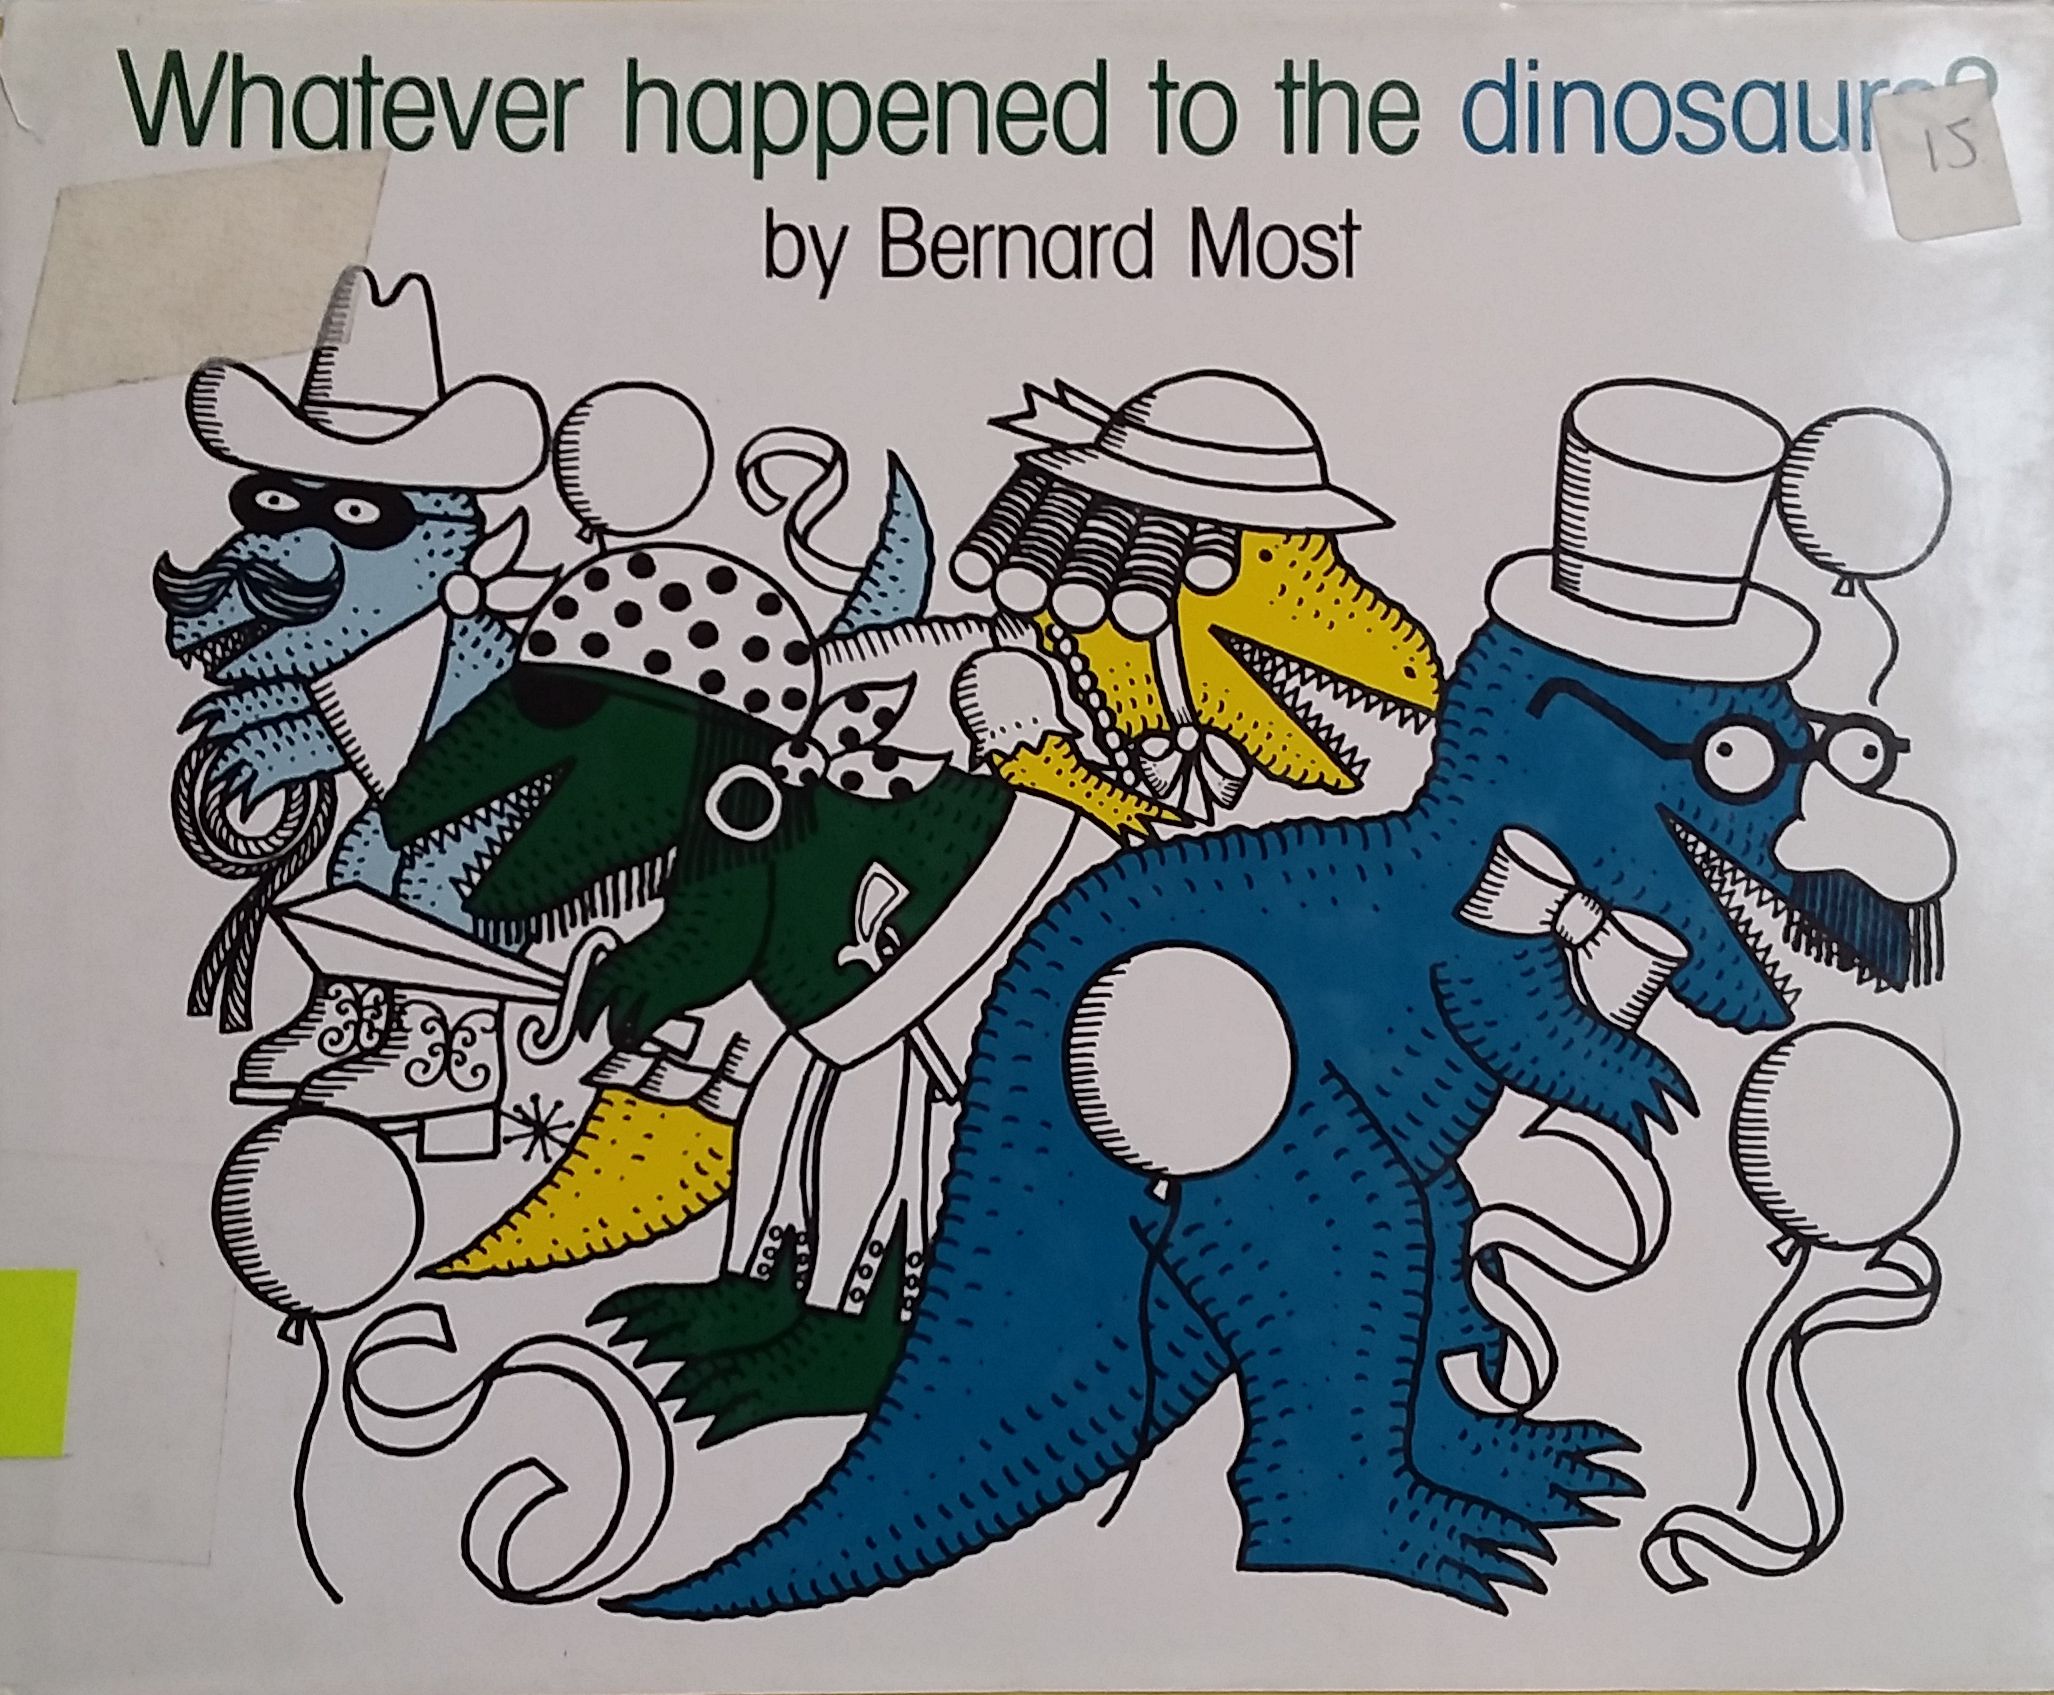 Whatever happened to the dinosaurs?